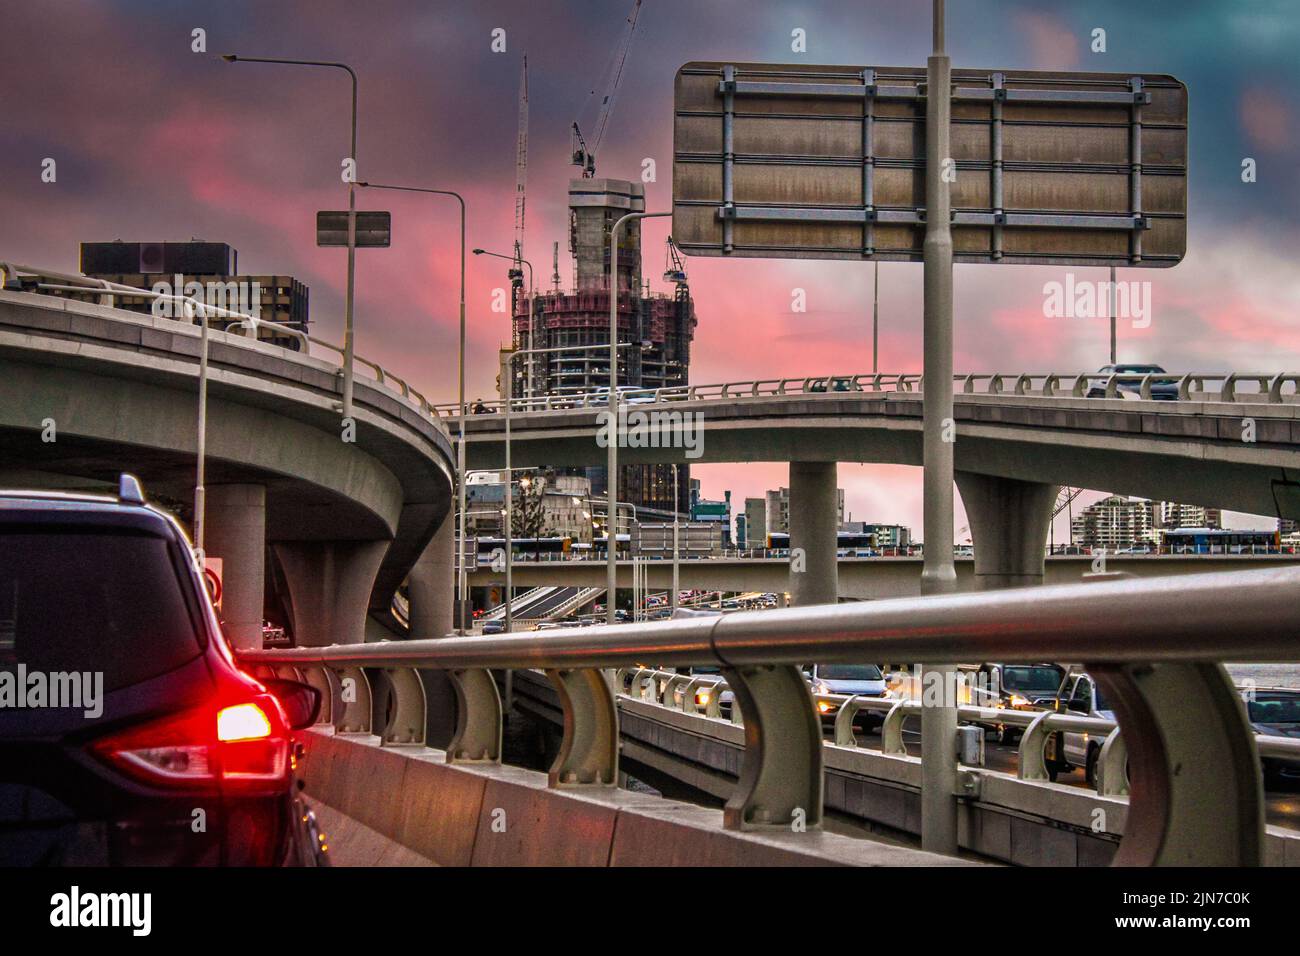 Sunset in the city - driving tangled traffic-filled roads at rush hour under colorful sky - Brisbane Australia Stock Photo